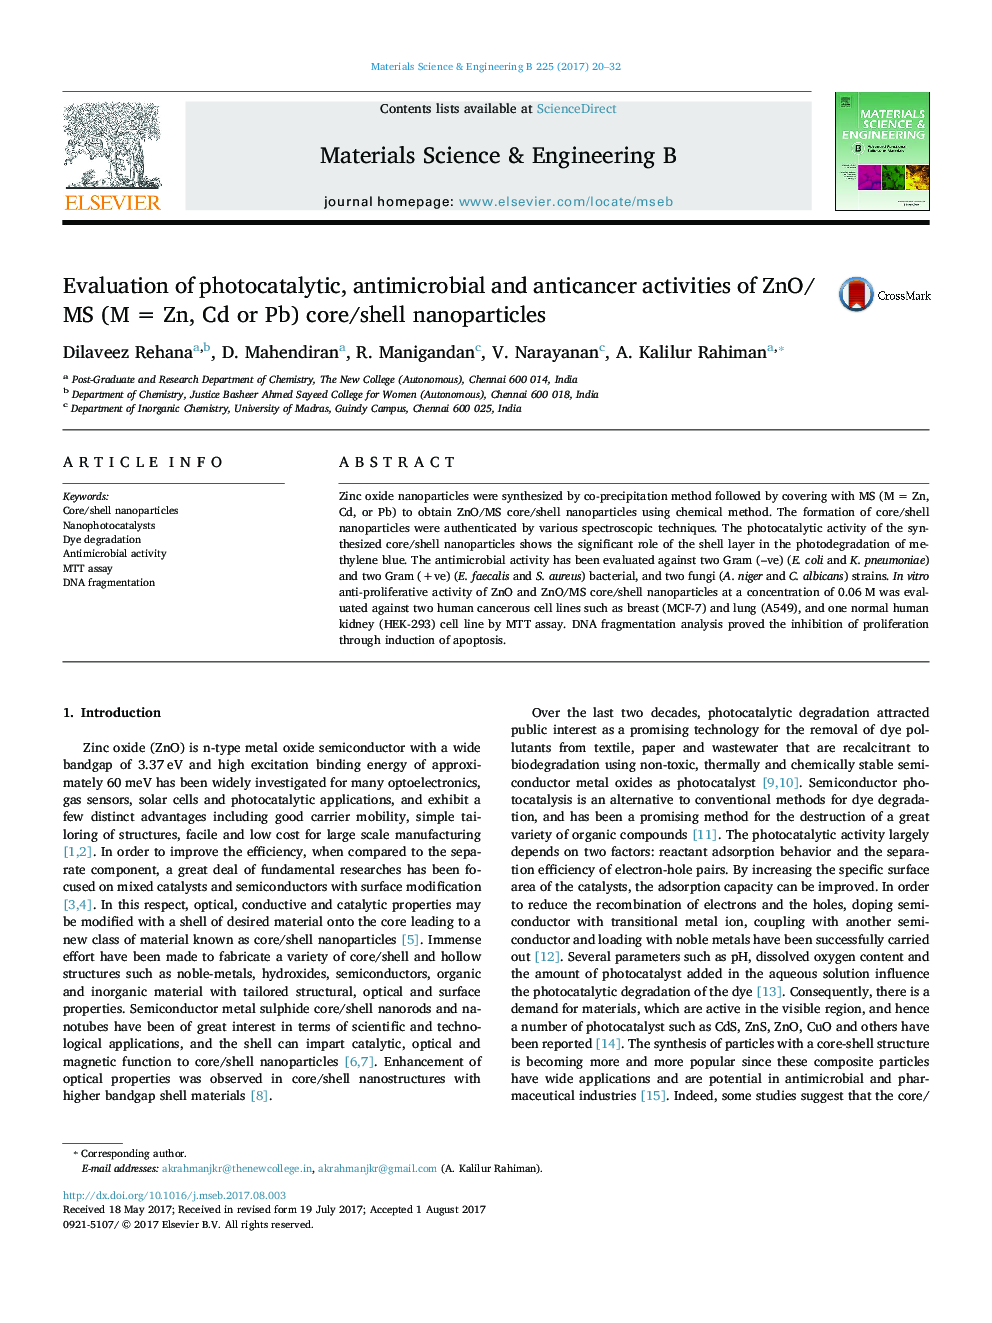 Evaluation of photocatalytic, antimicrobial and anticancer activities of ZnO/MS (MÂ =Â Zn, Cd or Pb) core/shell nanoparticles